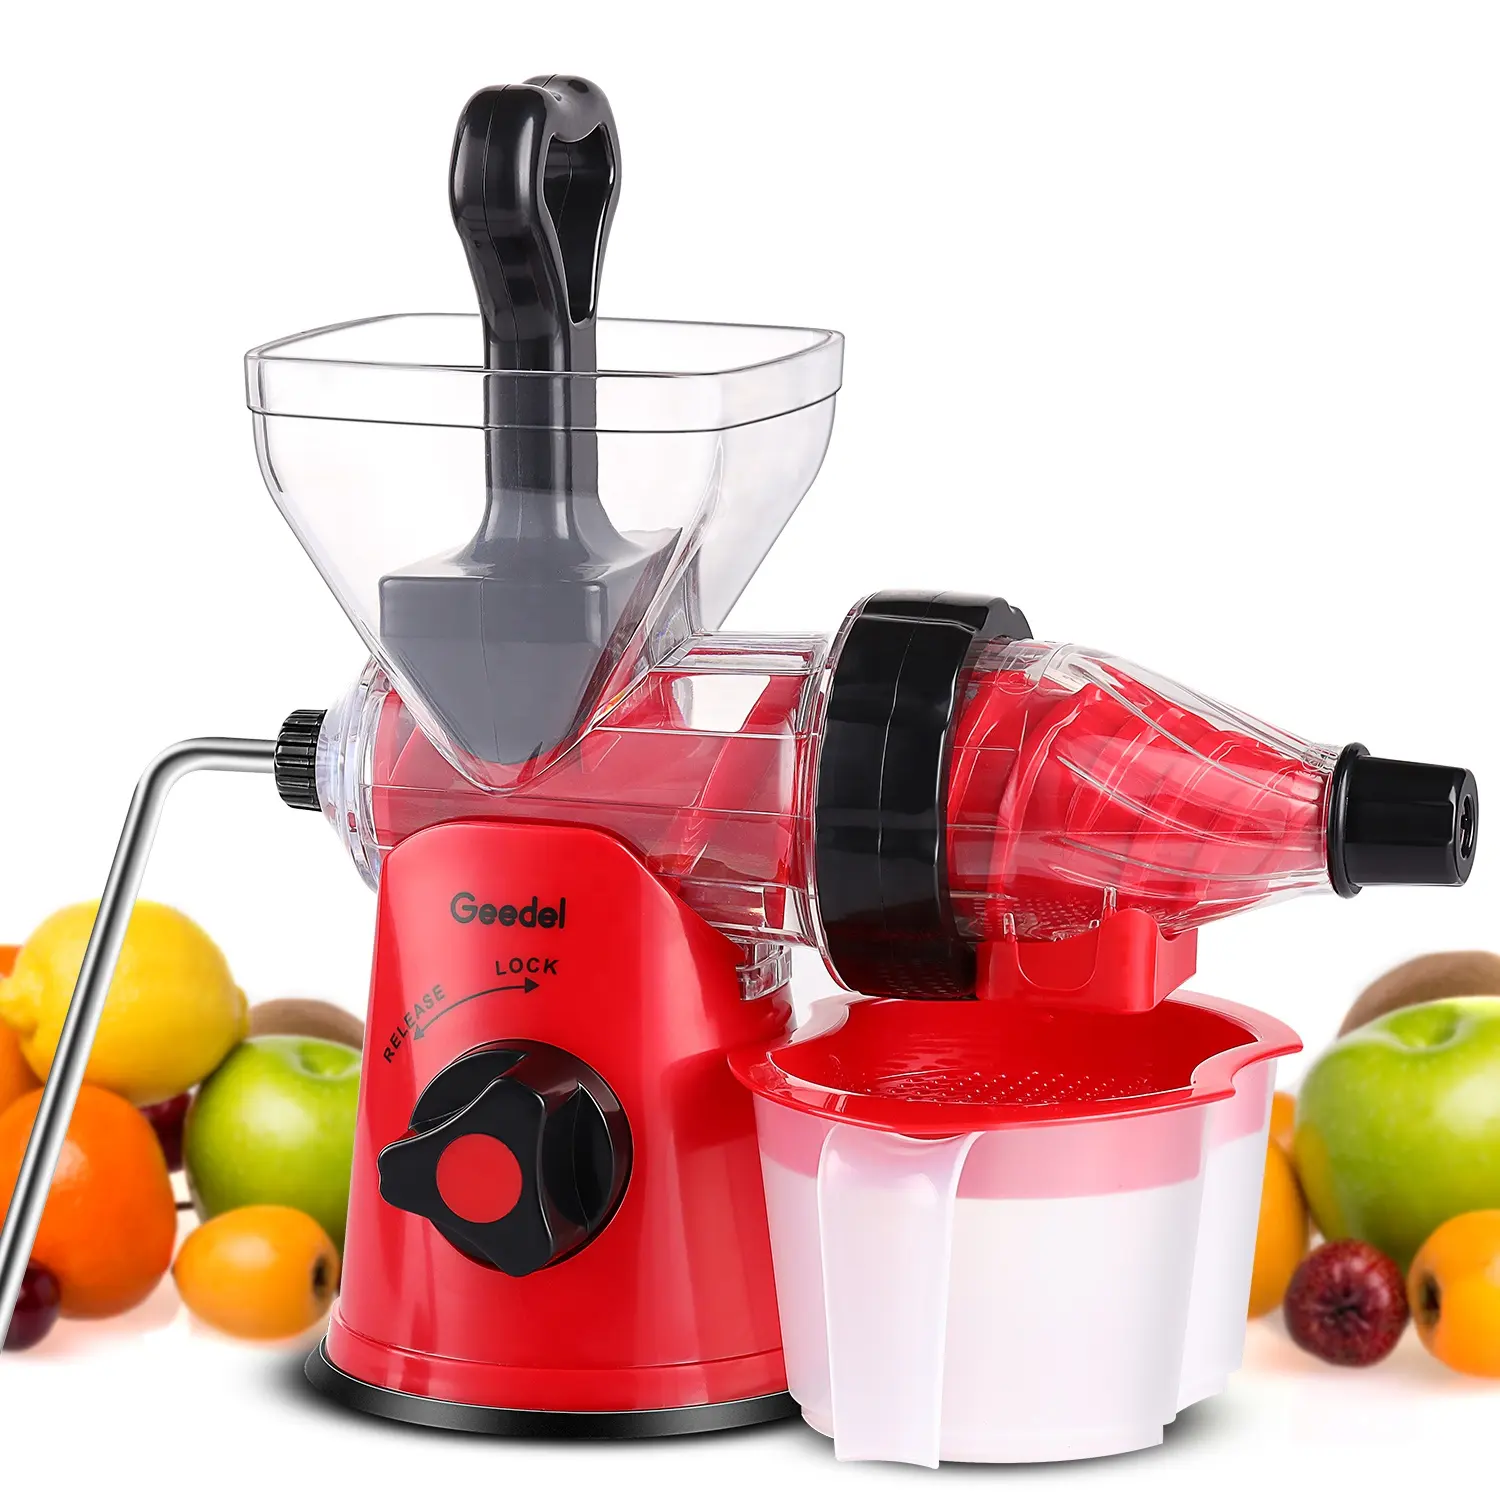 uitvoeren bijvoorbeeld zal ik doen Logo Customized Orange Hot Point Slow Juicer Cheap Extract Squeeze Kiwi  Soft Press Mini Hand Fresh Juicer Fruit Mill - Buy Juicer Portable,Apple  And Carrot Juicer,Slow Juicers Made In China Product on